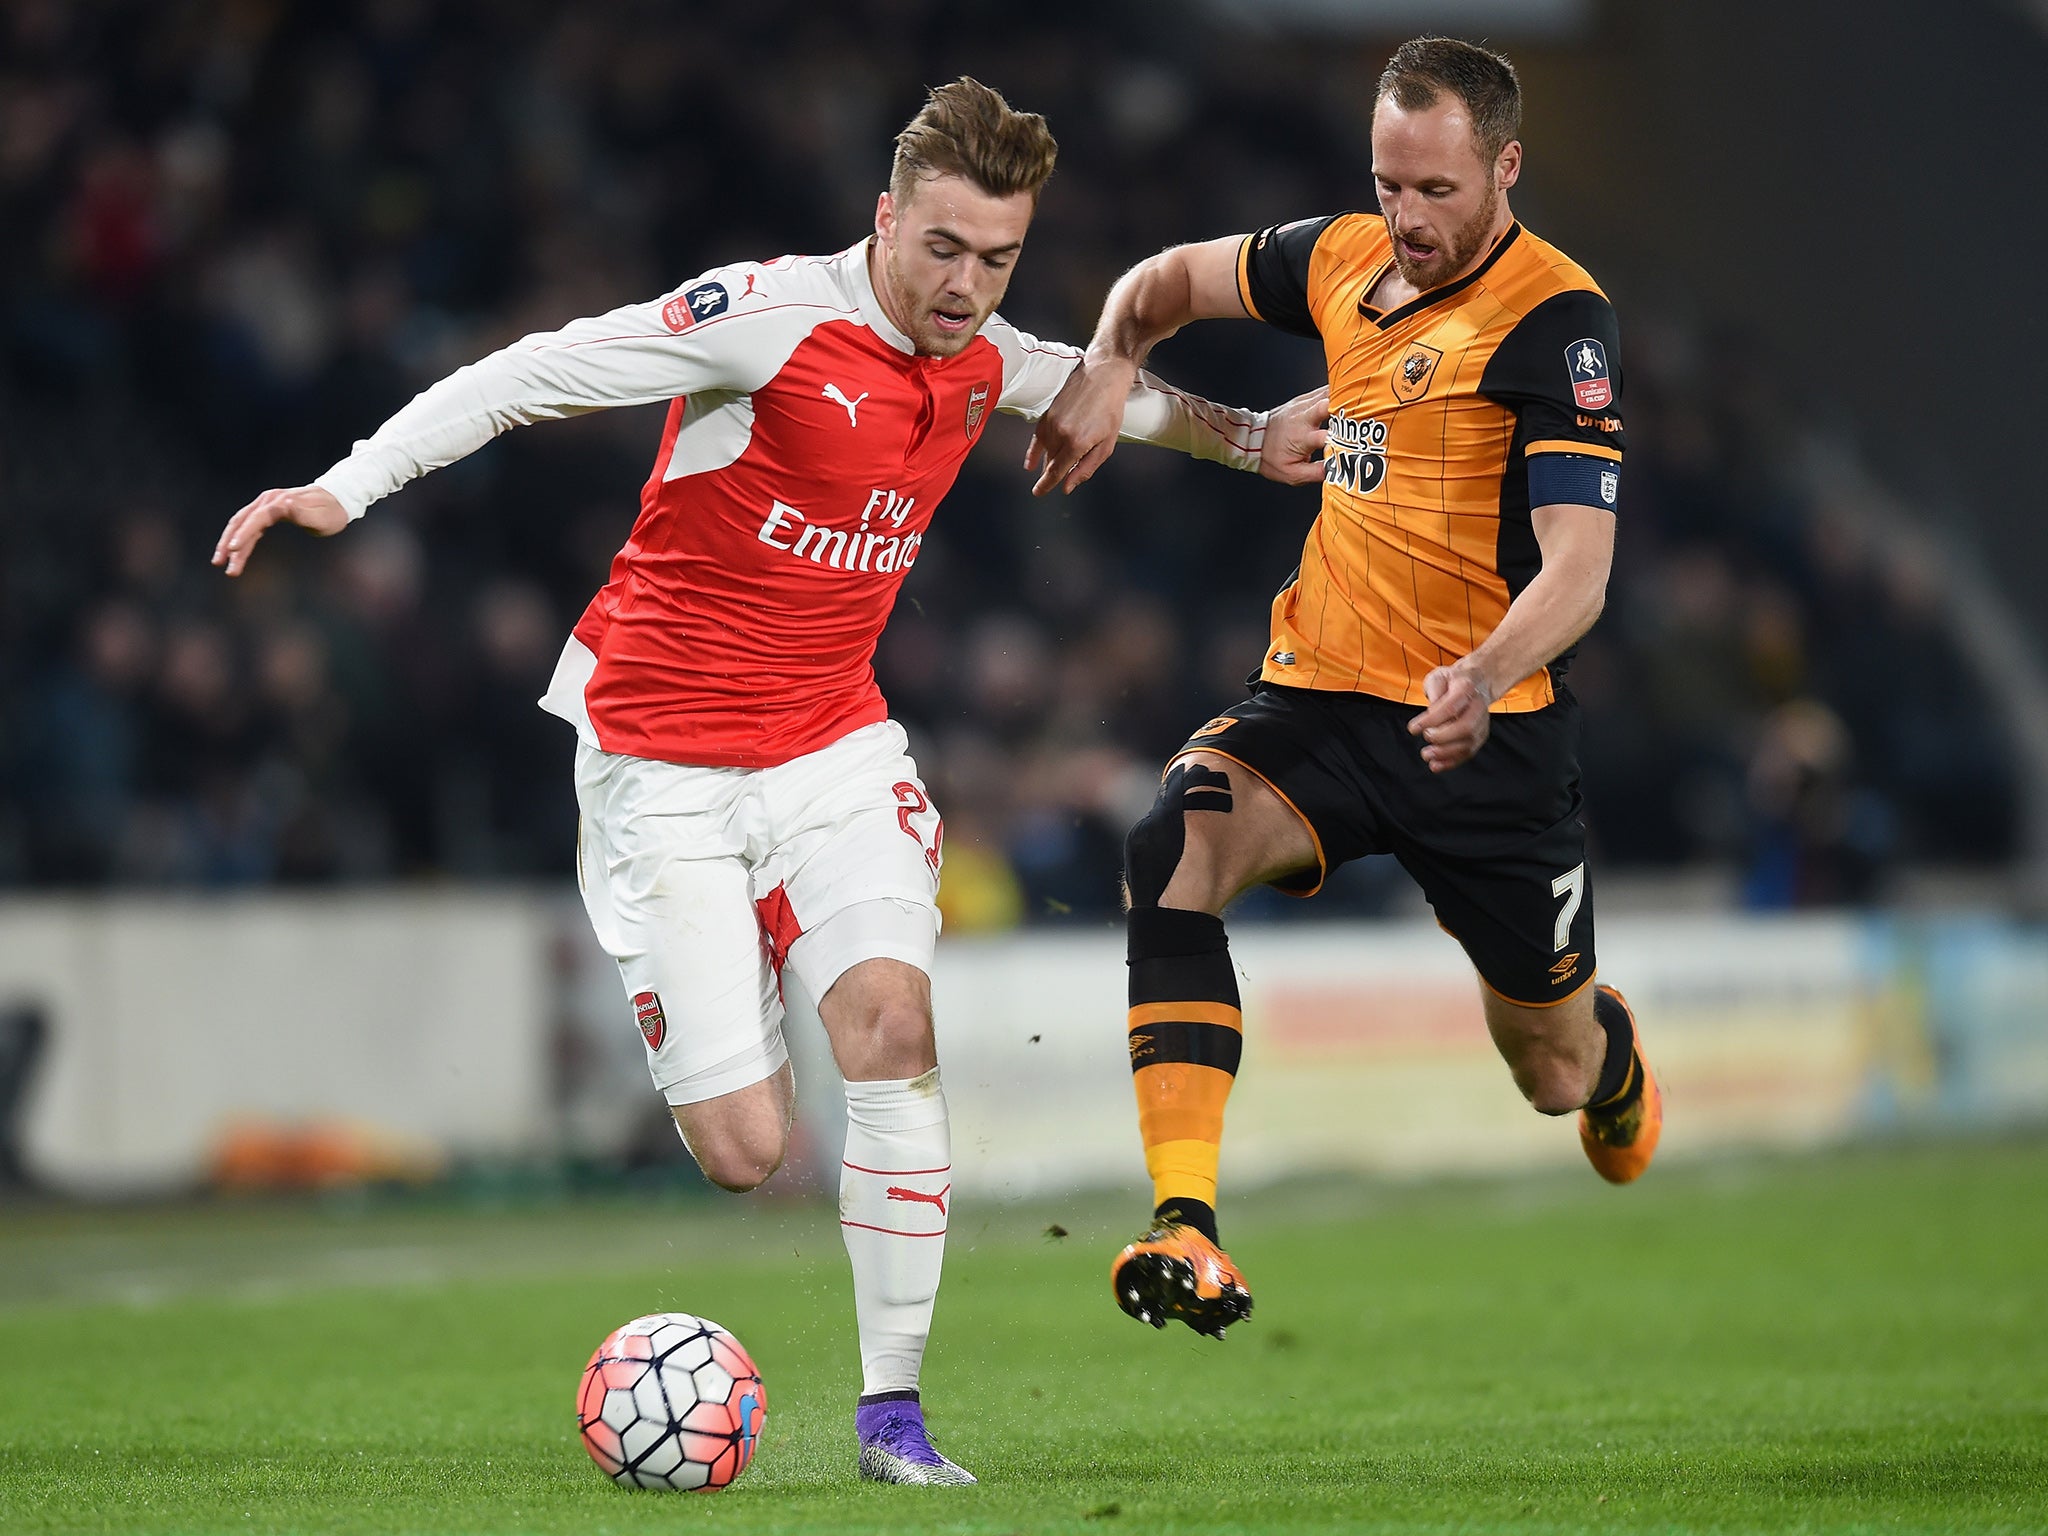 Calum Chambers will not feature again for Arsenal this season